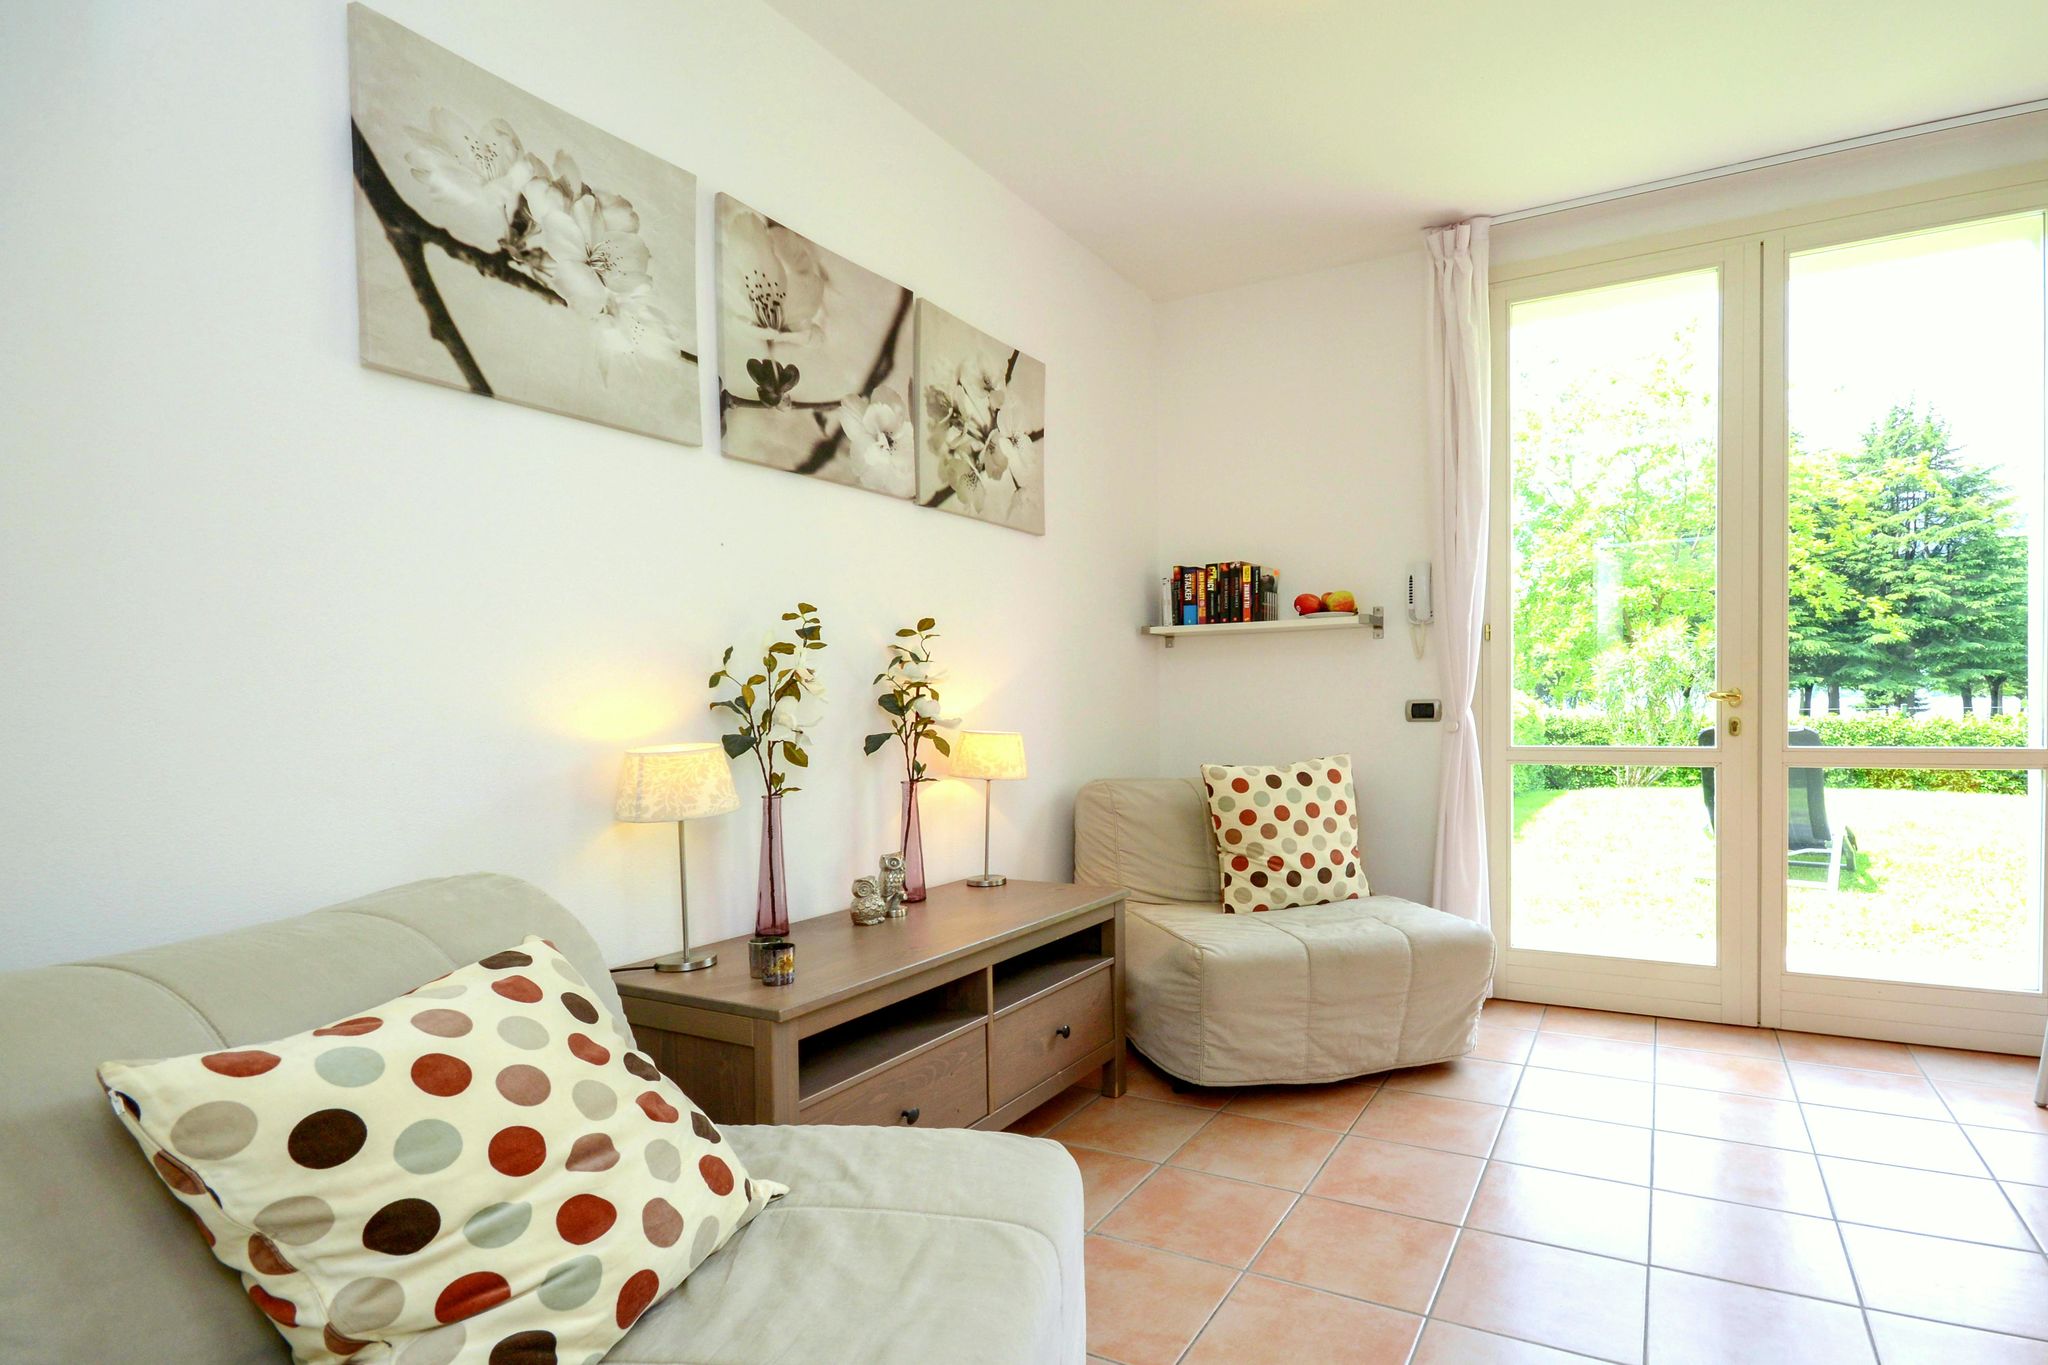 Apartment directly on Lake Lugano with garden and then beautiful park with Lido.